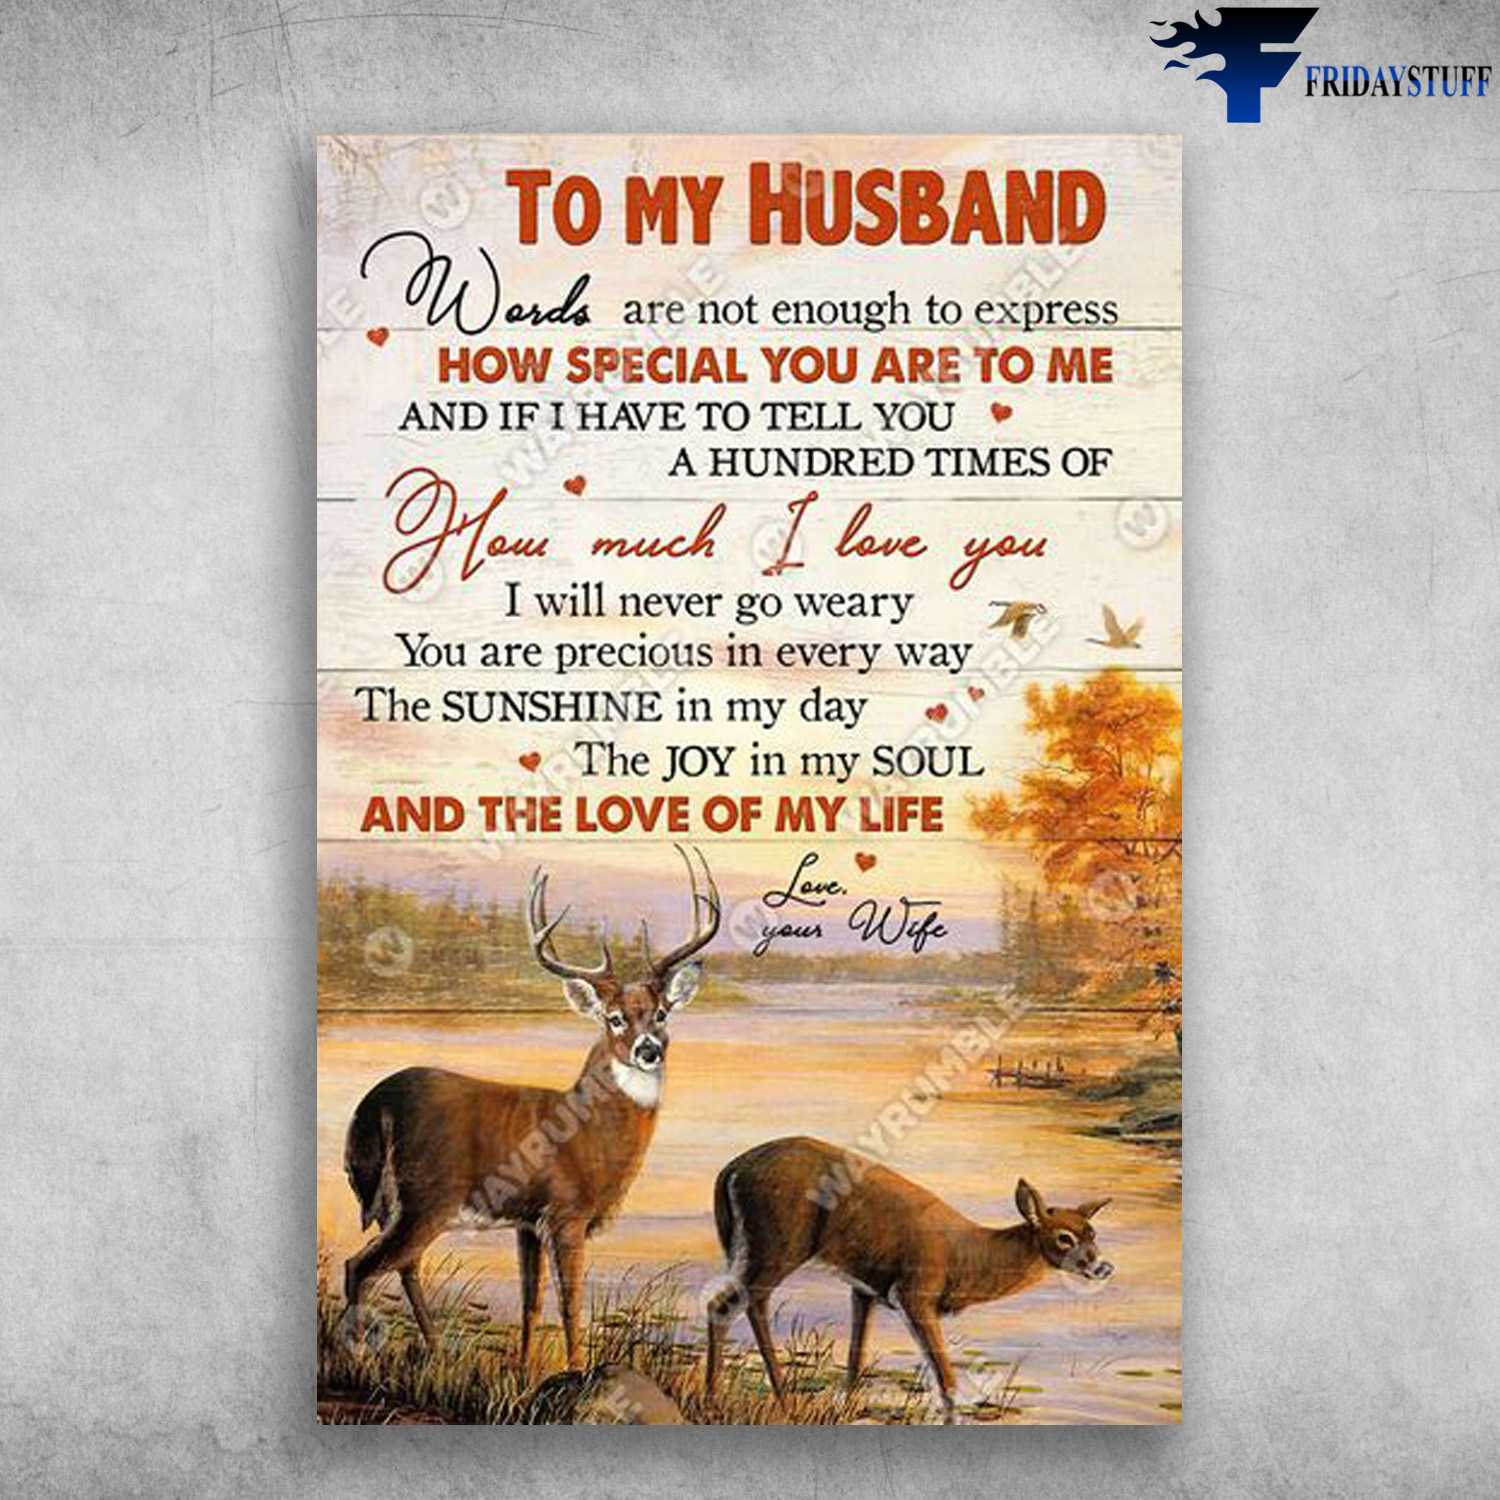 Deer Couple, Husband And Wife, To My Husband, Words Are Not Enough To Express, How Special You Are To Me, And If I Have To Tell You A Hundred Times Of, How Much I Love You